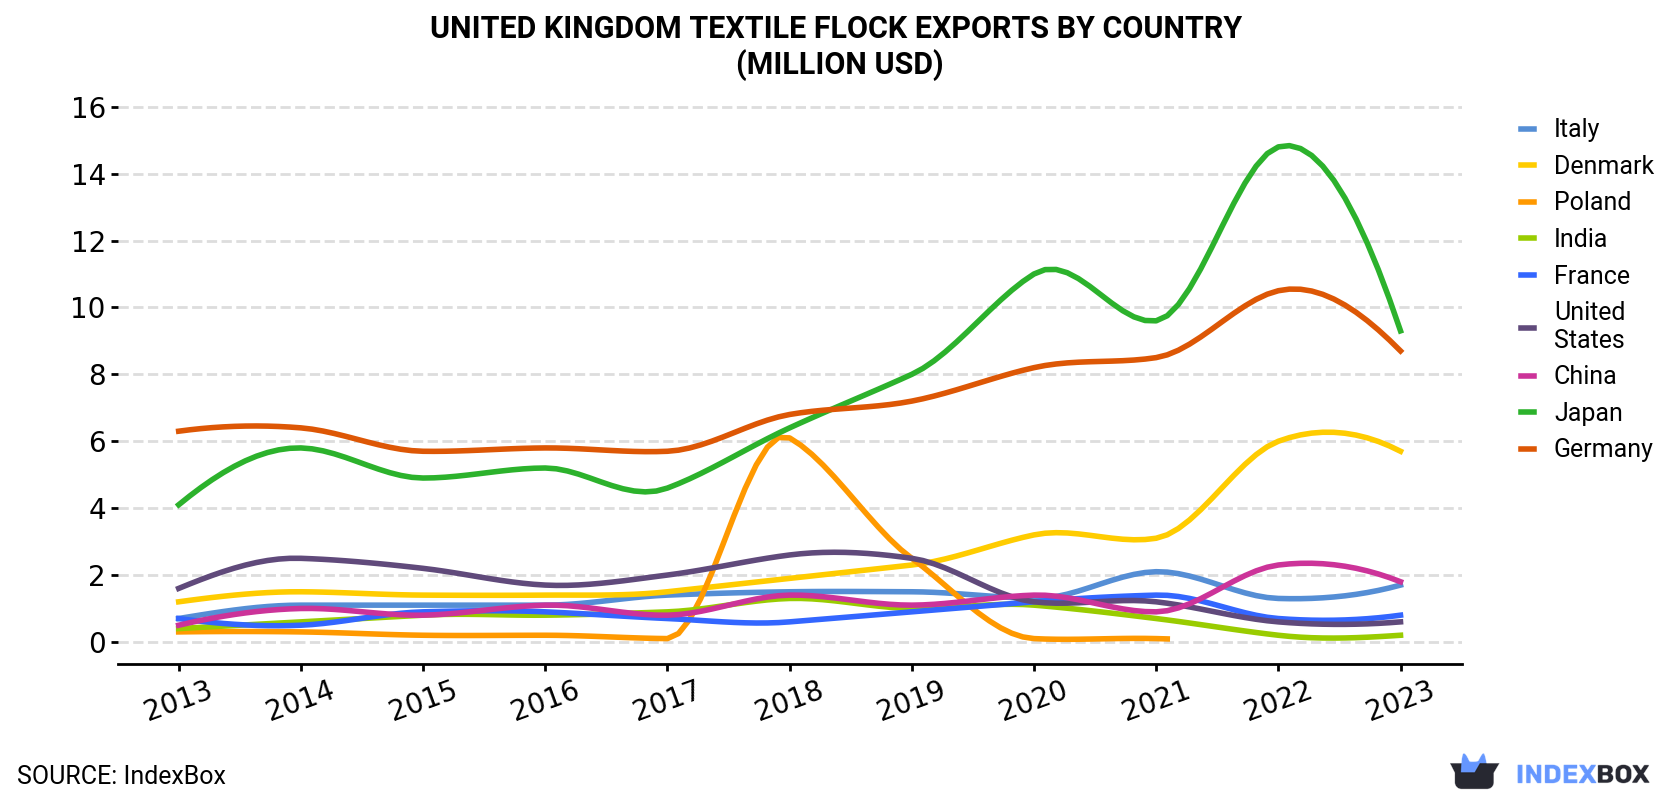 United Kingdom Textile Flock Exports By Country (Million USD)